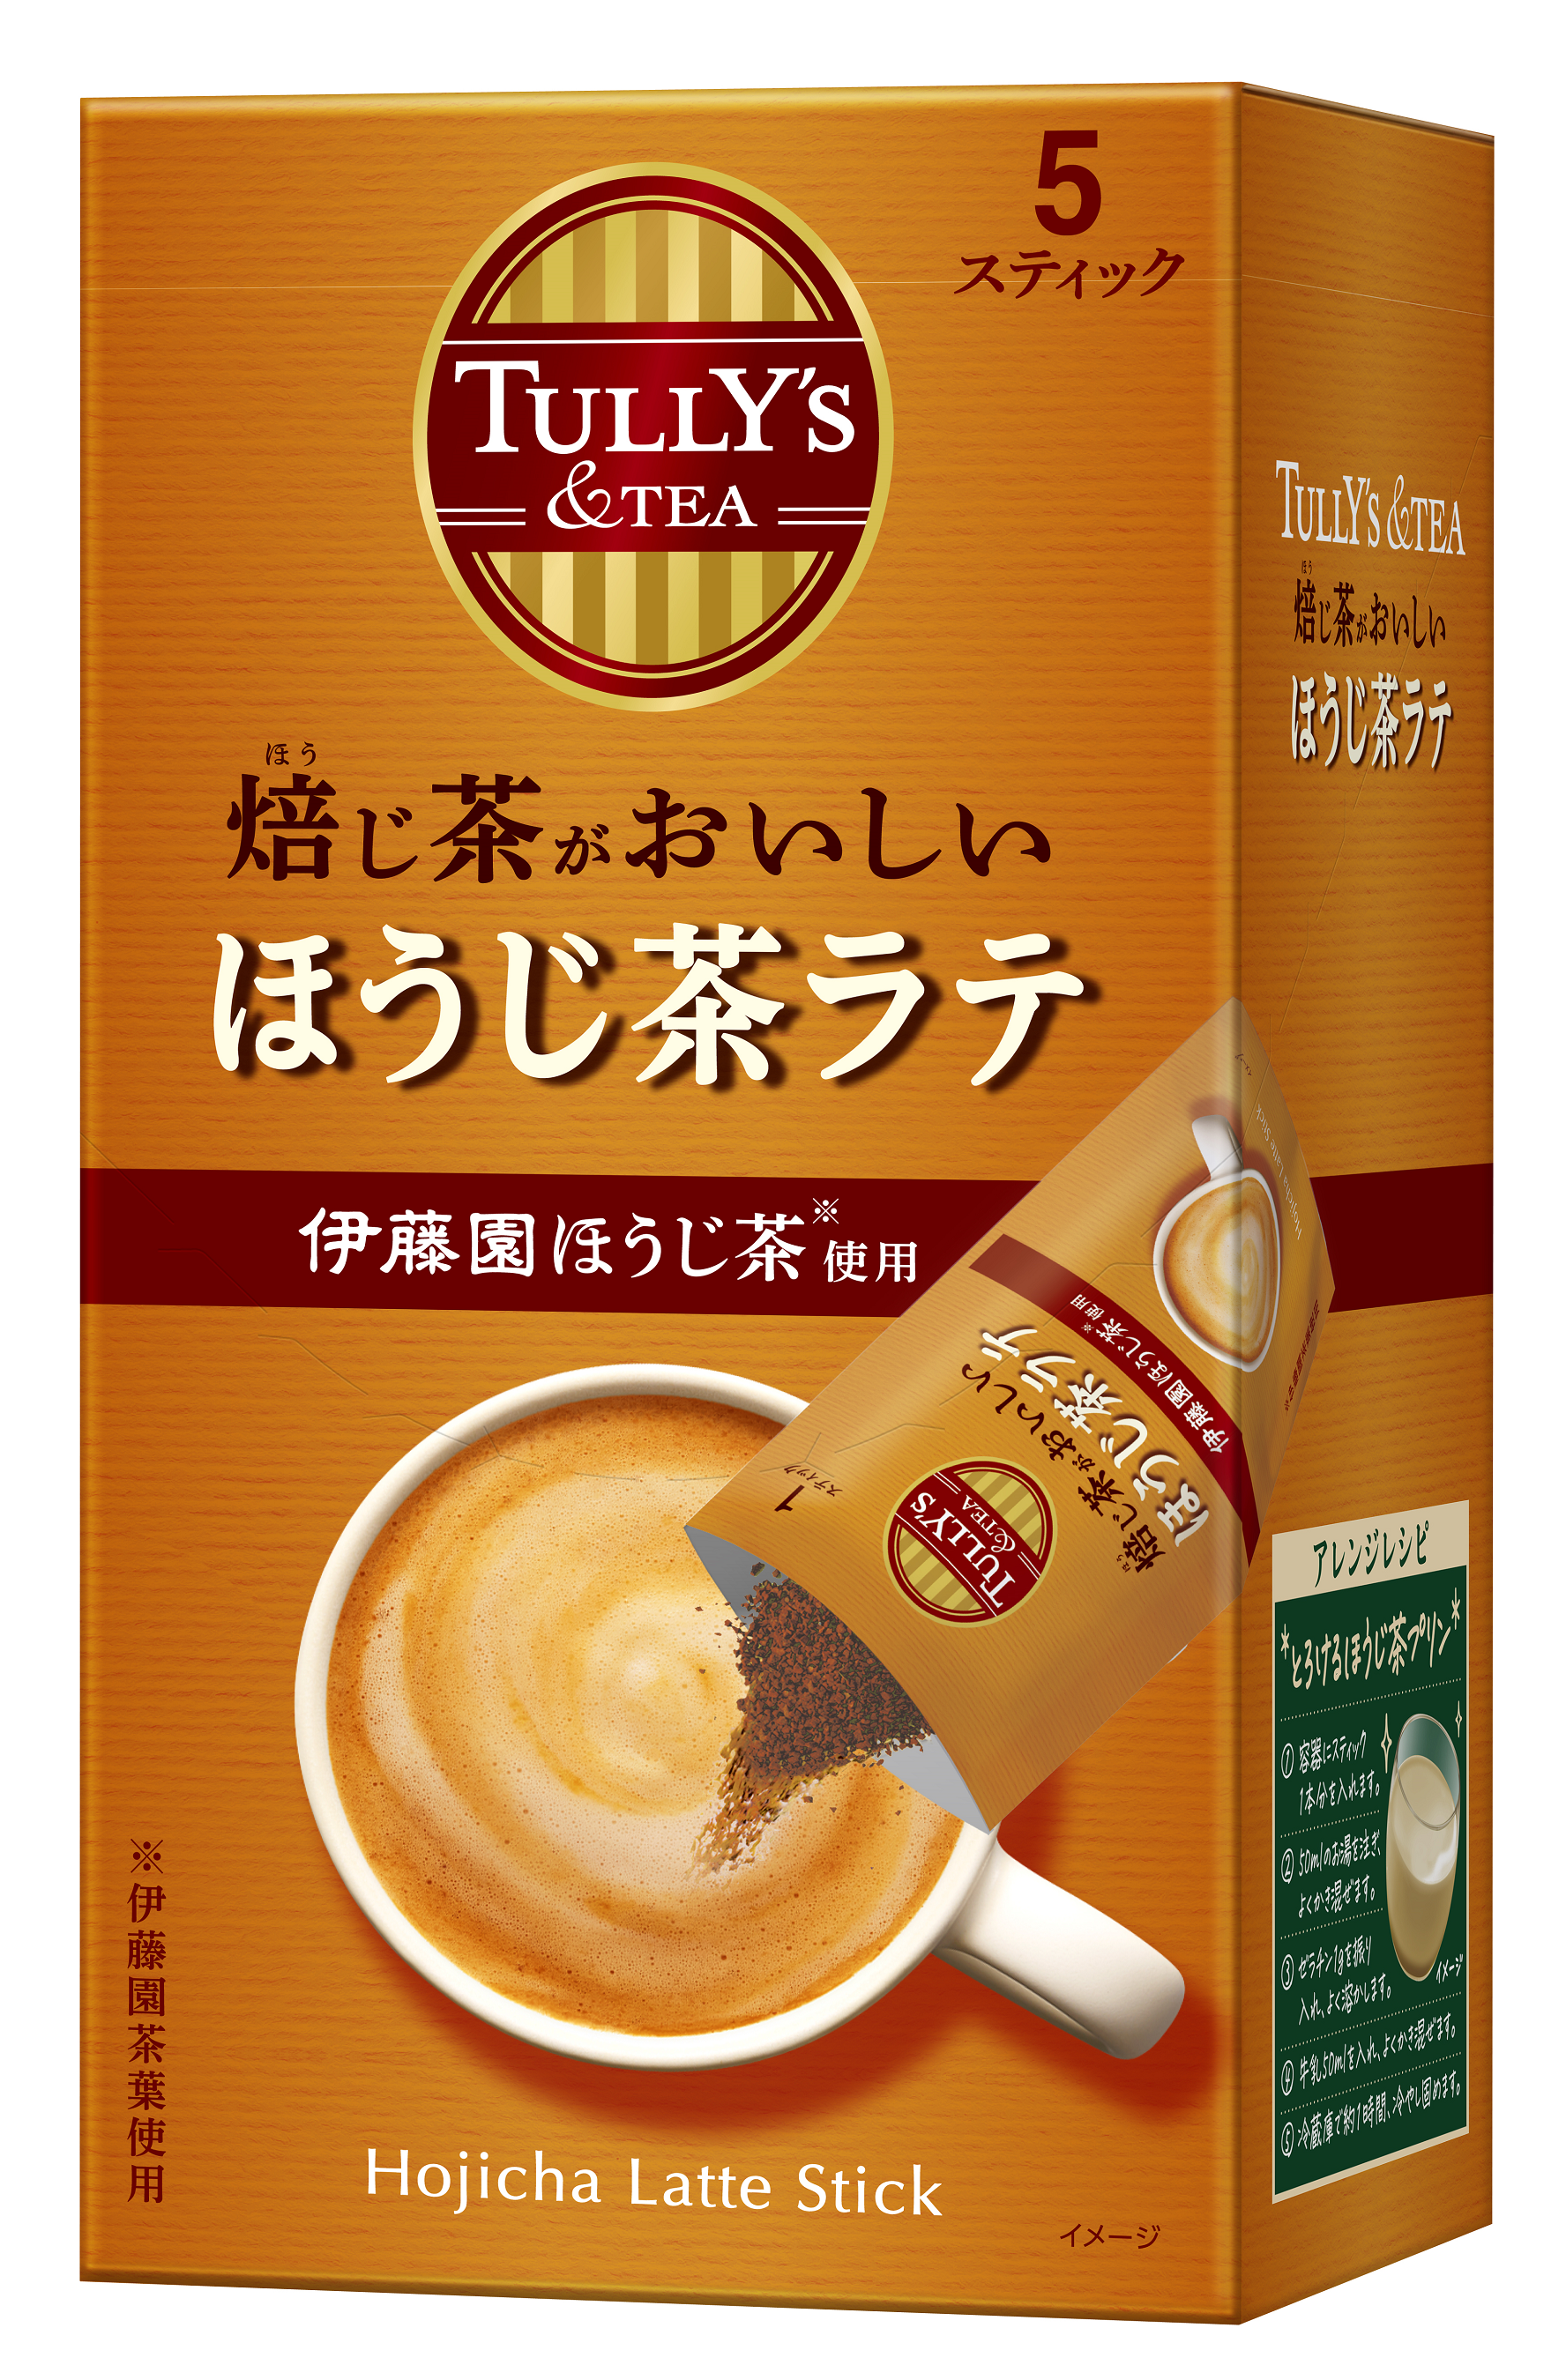 TULLY'S ＆TEA 抹茶がおいしい抹茶ラテ」 「同 焙じ茶がおいしい 